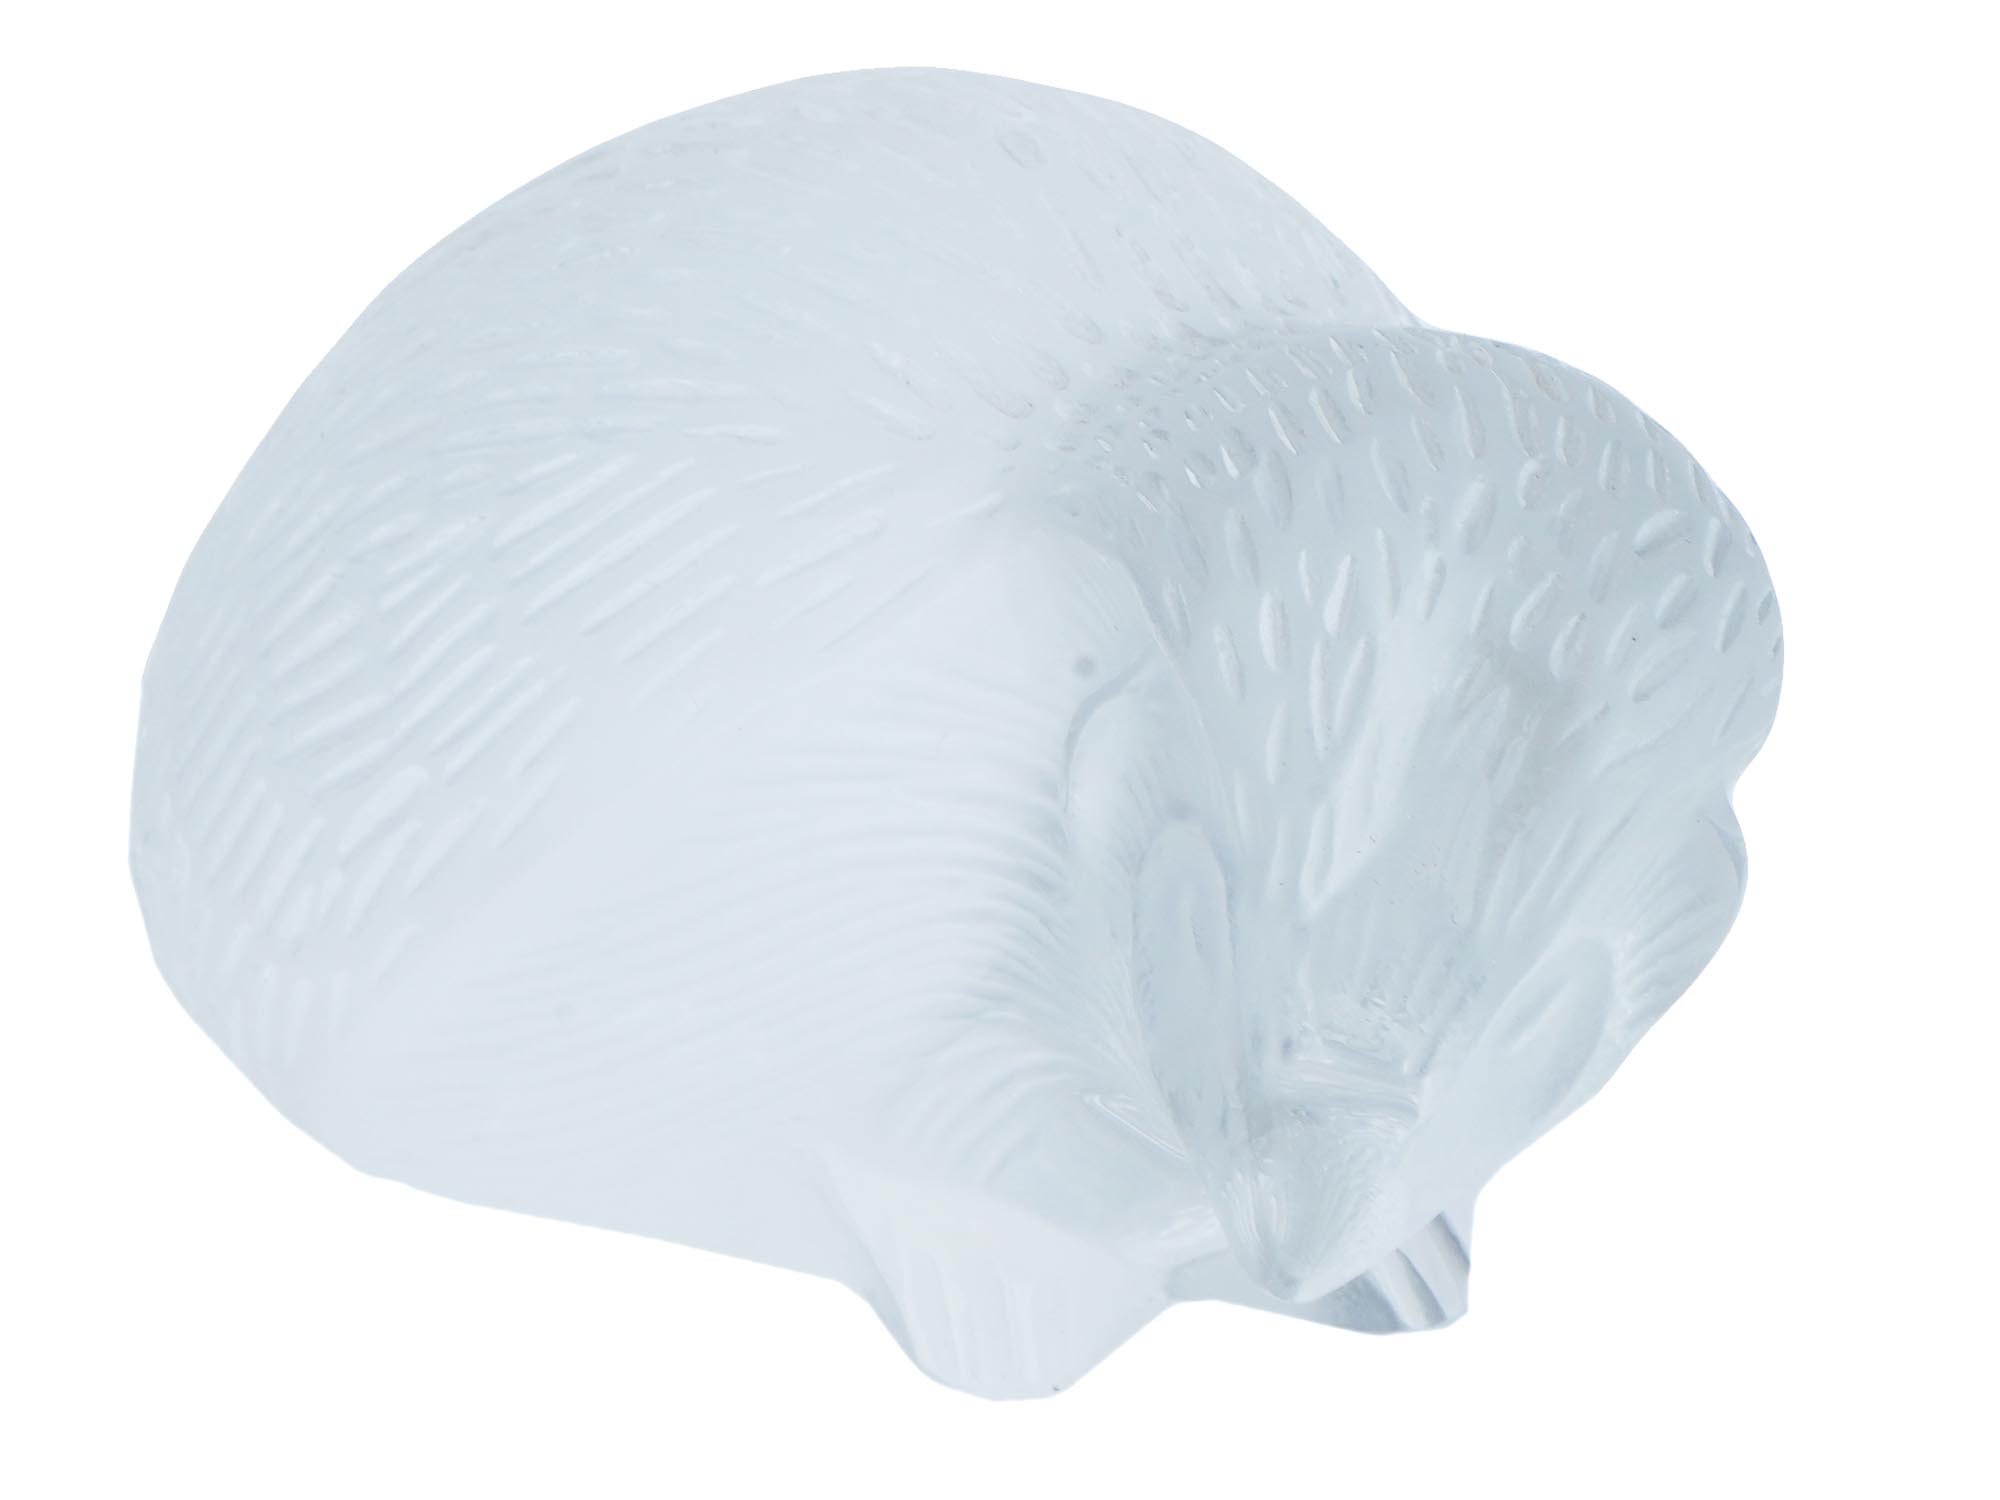 LALIQUE MANNER HEDGEHOG GLASS FIGURAL PAPERWEIGHT PIC-1